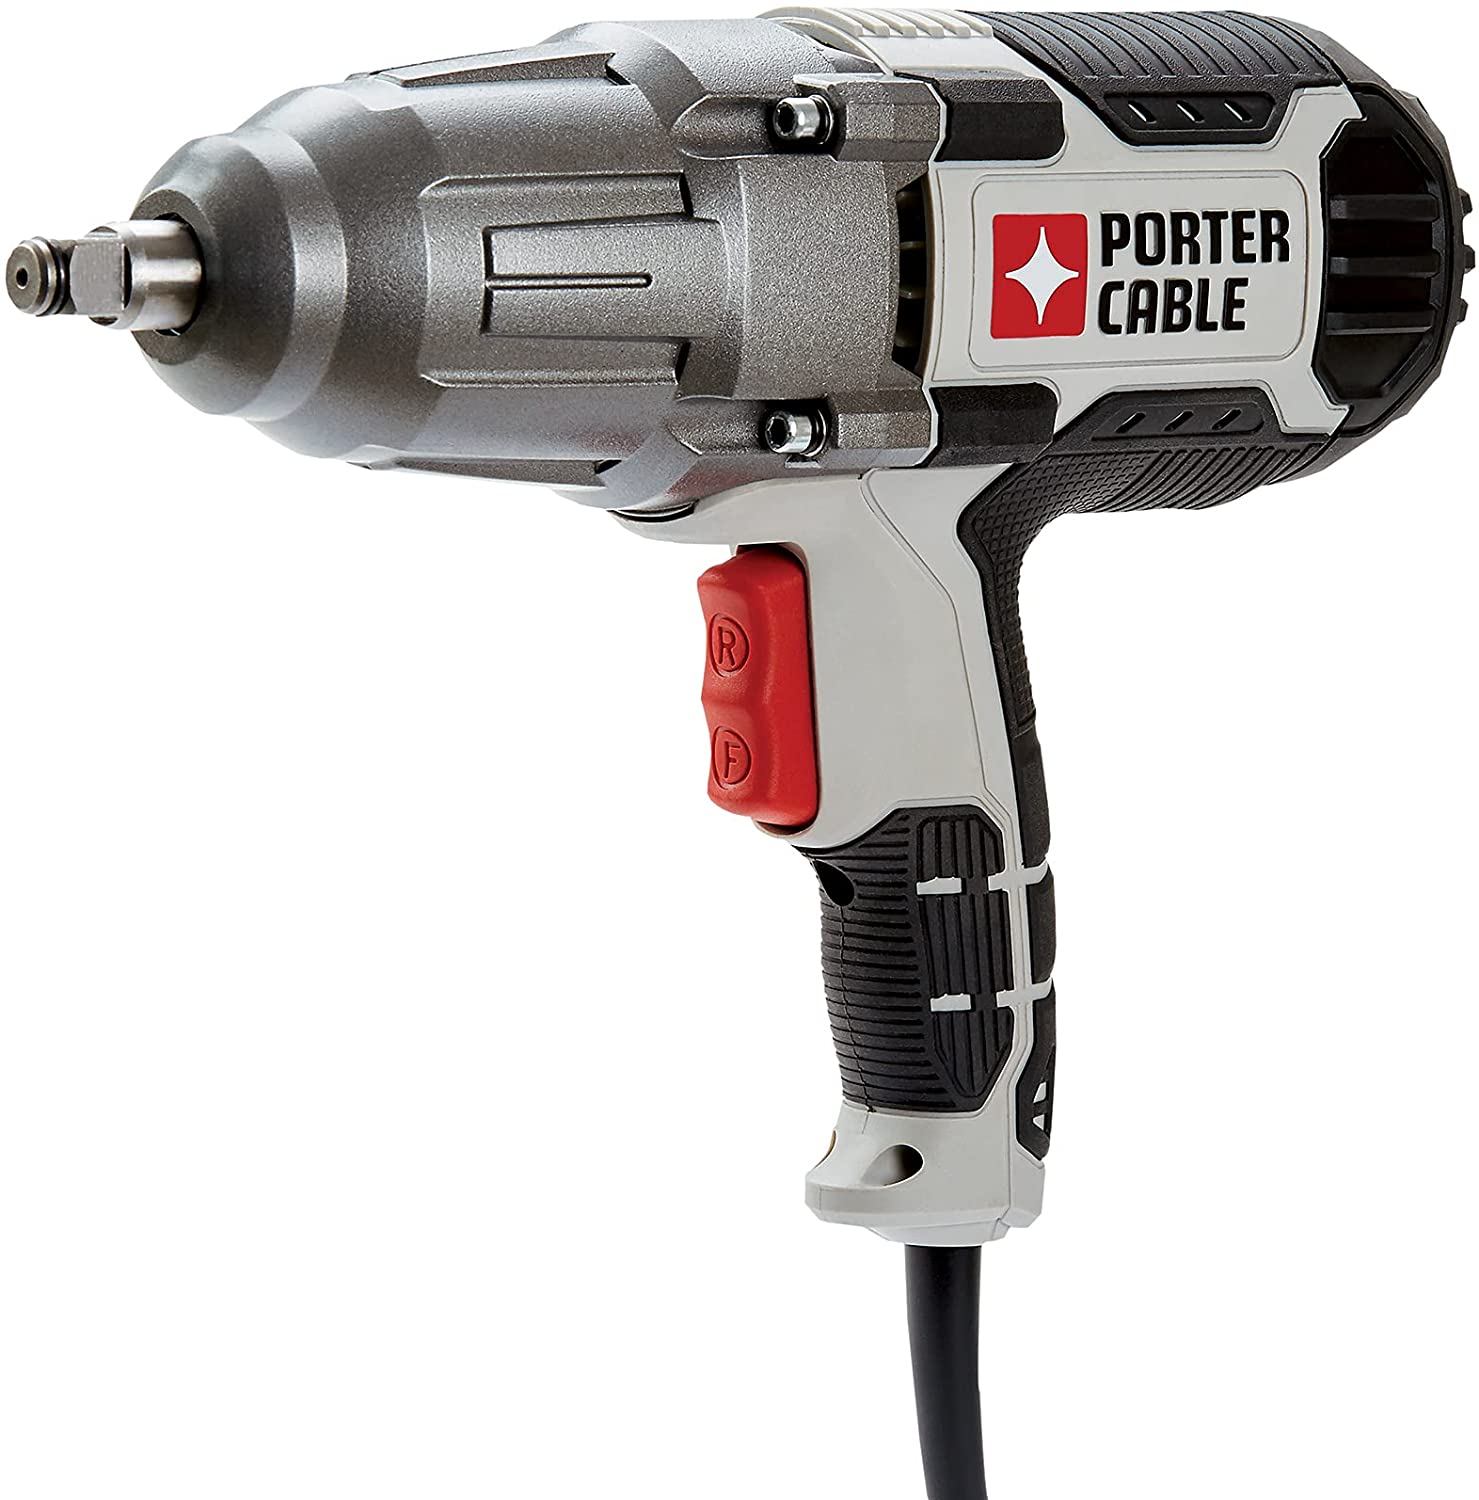 PORTER-CABLE Impact Wrench, 7.5-Amp, 1/2-Inch (PCE211) $65